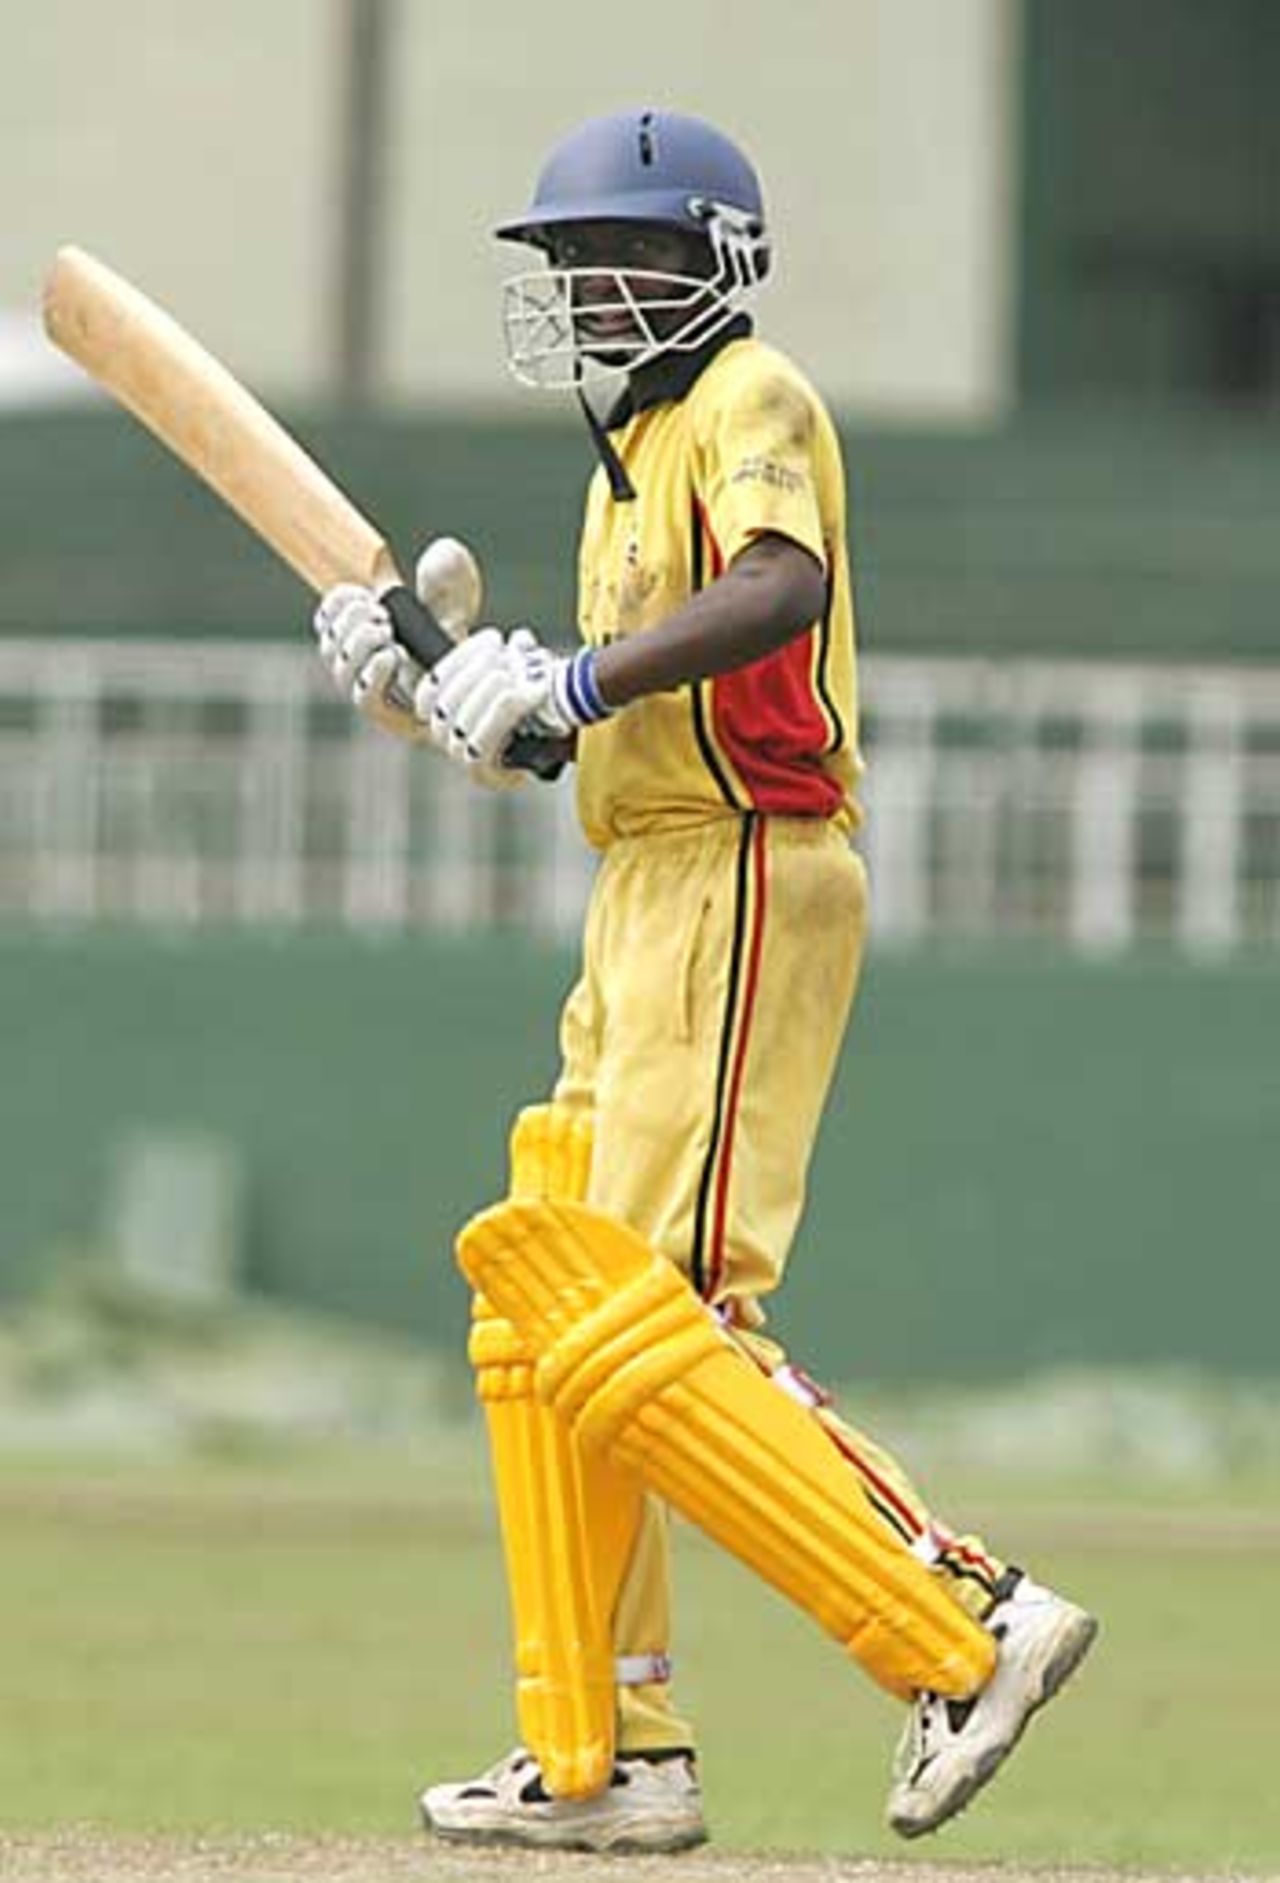 Emmanuel Nakaana, the youngest player in the Under-19 World Cup, Bangladesh Under-19s v Uganda Under-19s, Colombo, February 9, 2006